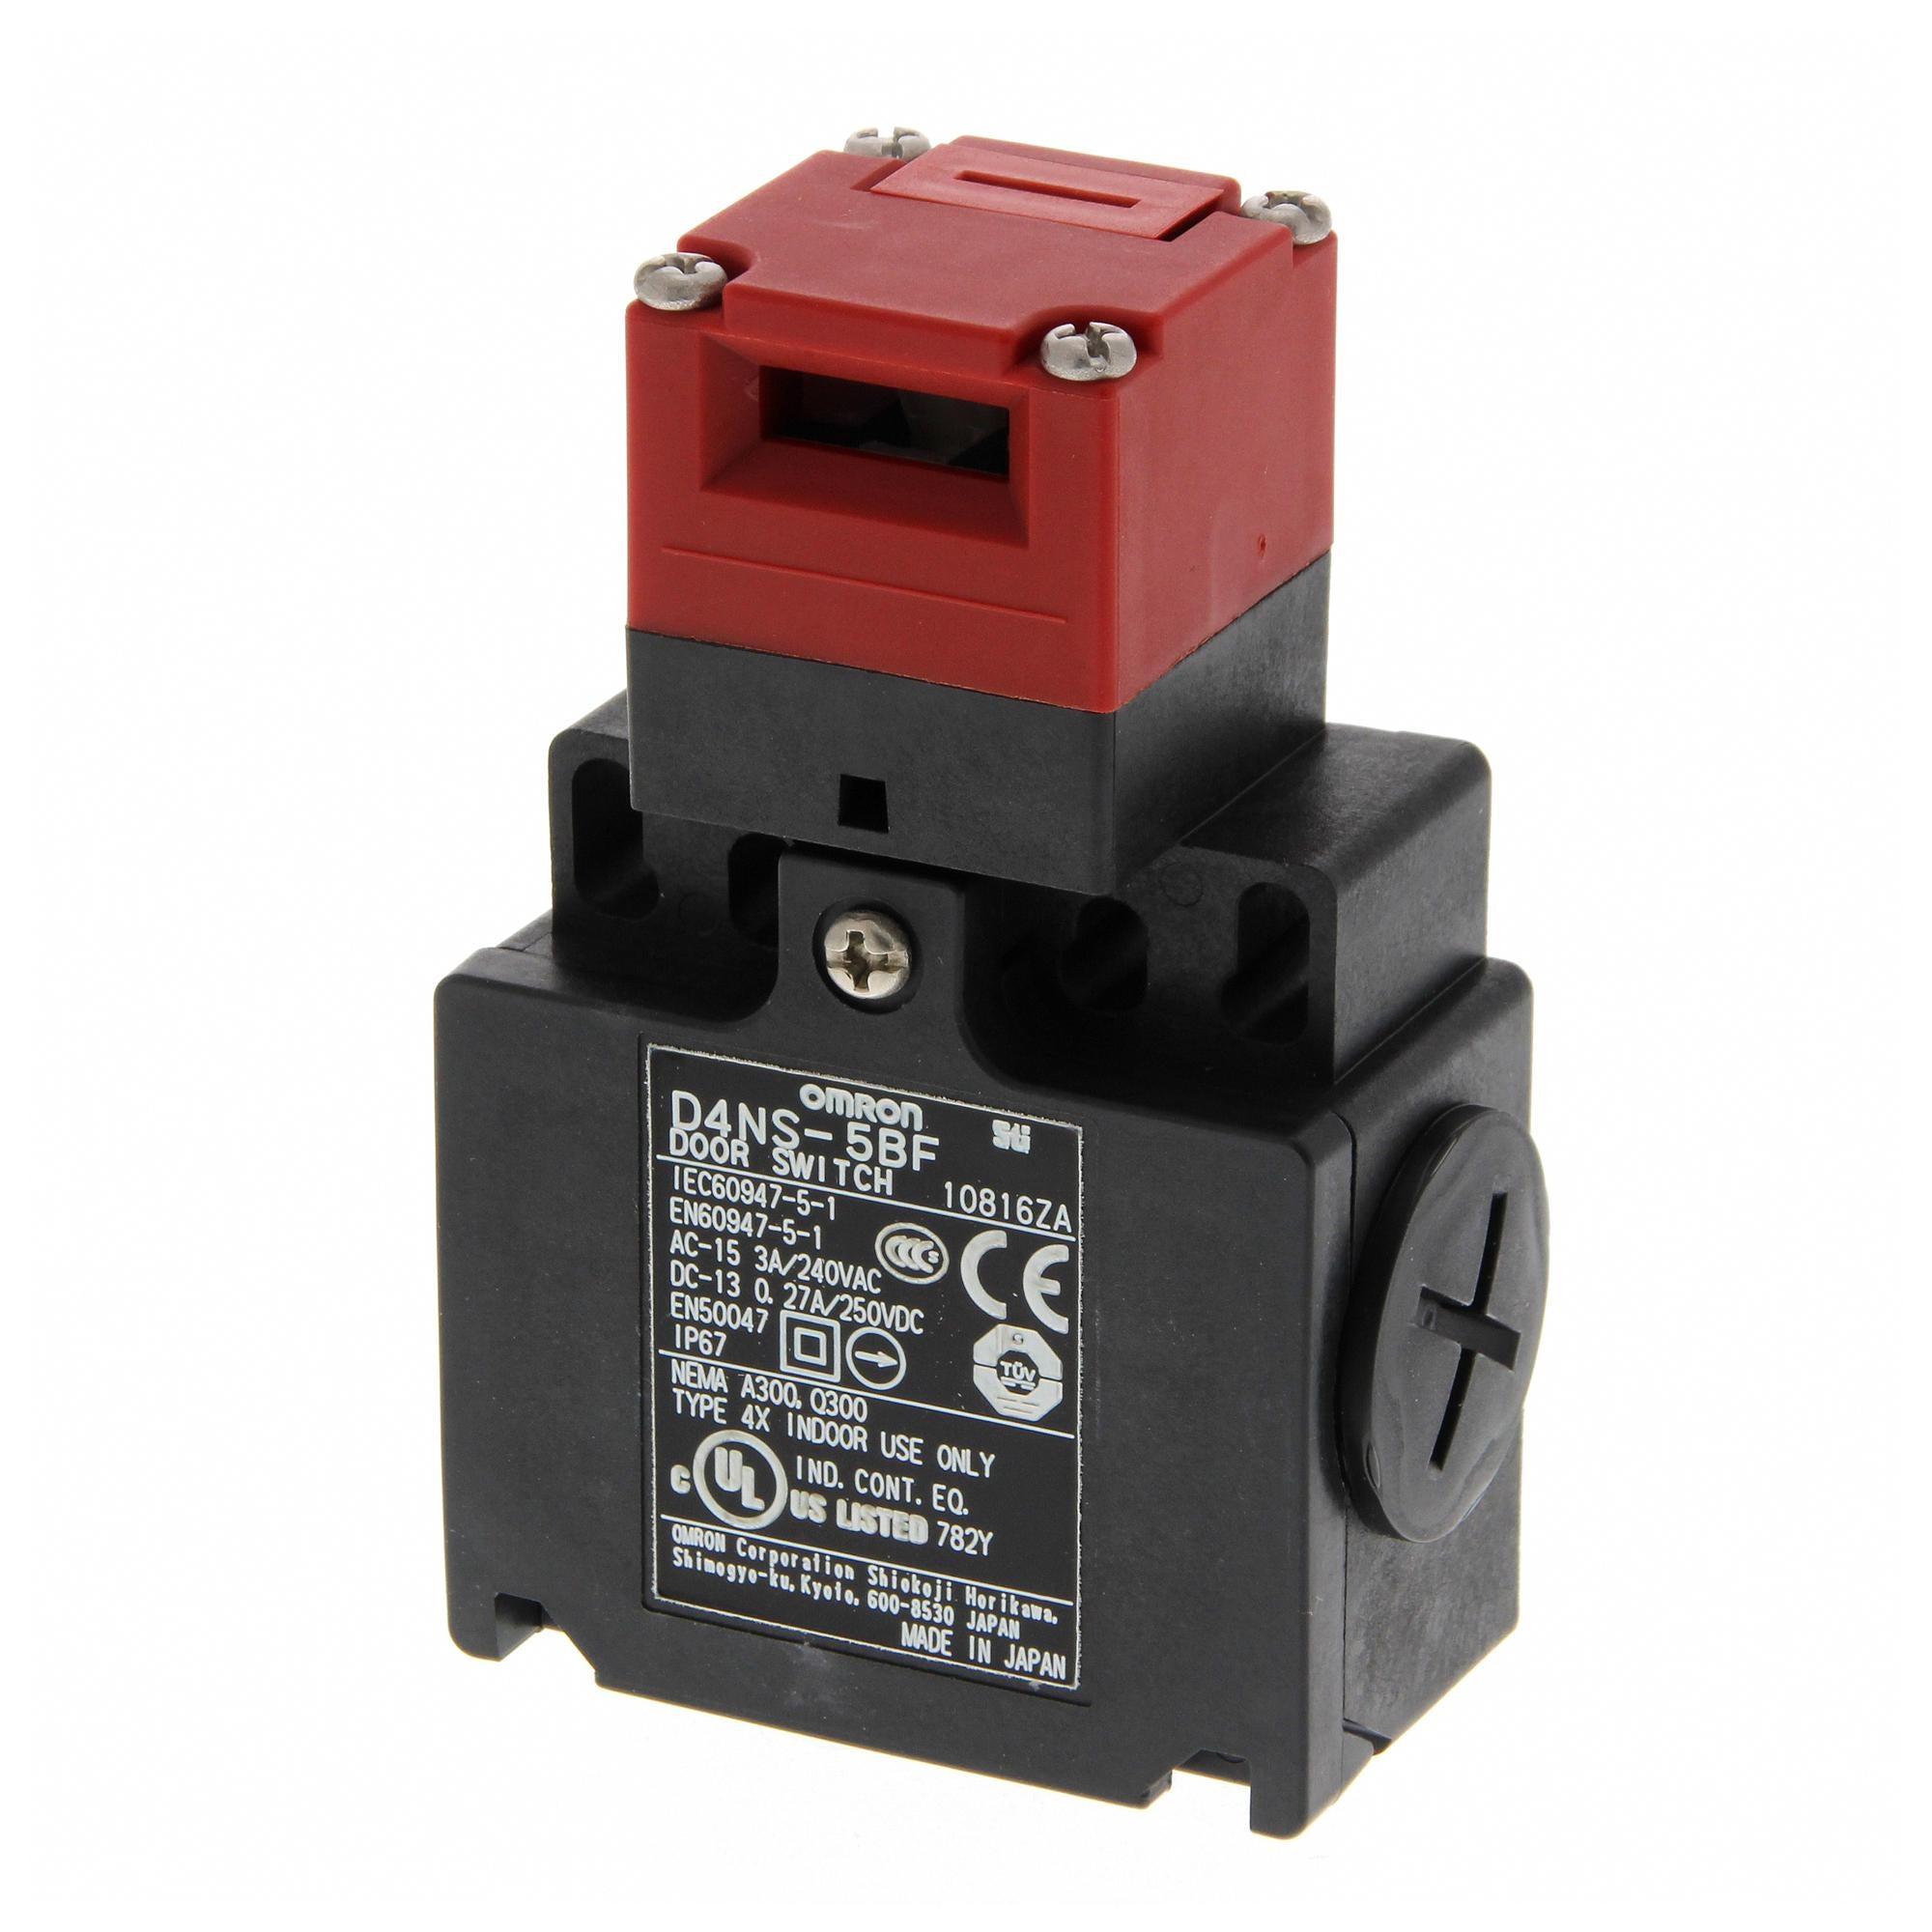 D4NS-5BF SAFETY INTERLOCK SWITCHES OMRON